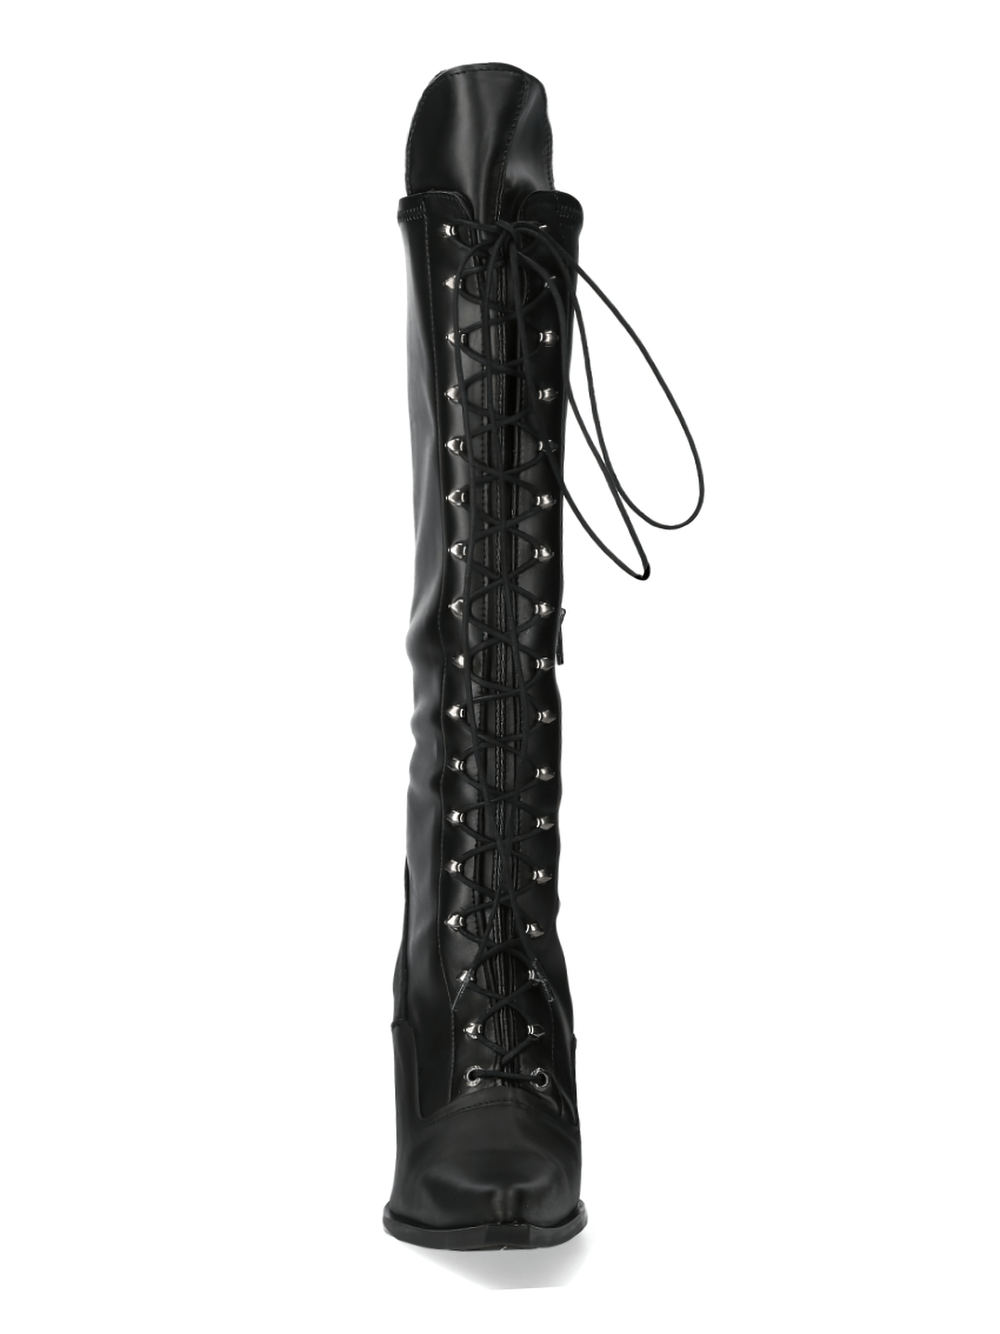 NEW ROCK Black Gothic Tall Laced Heeled Boots